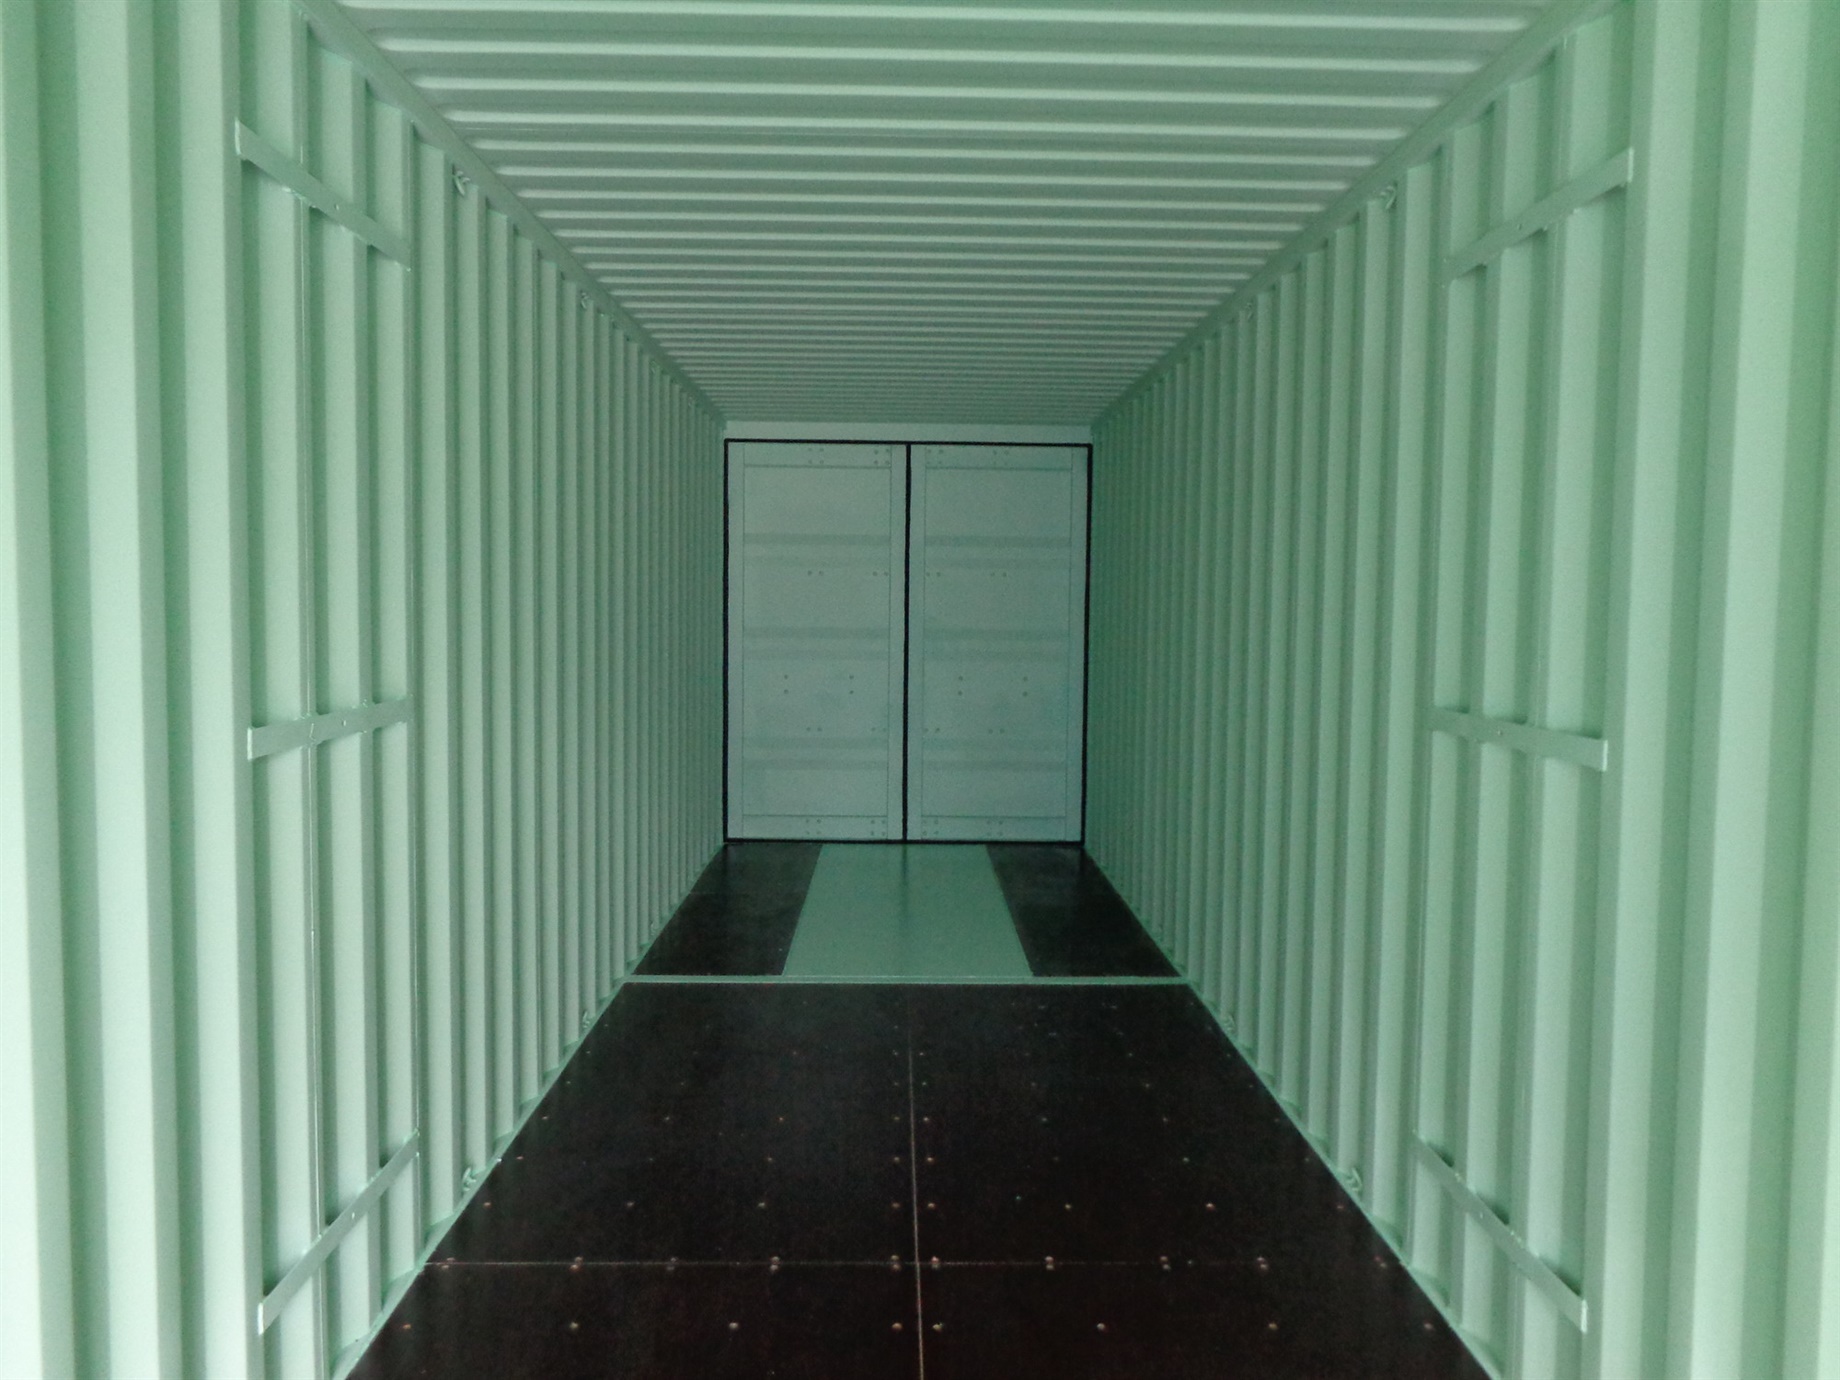 Container with doors on each end open one side 40 inside